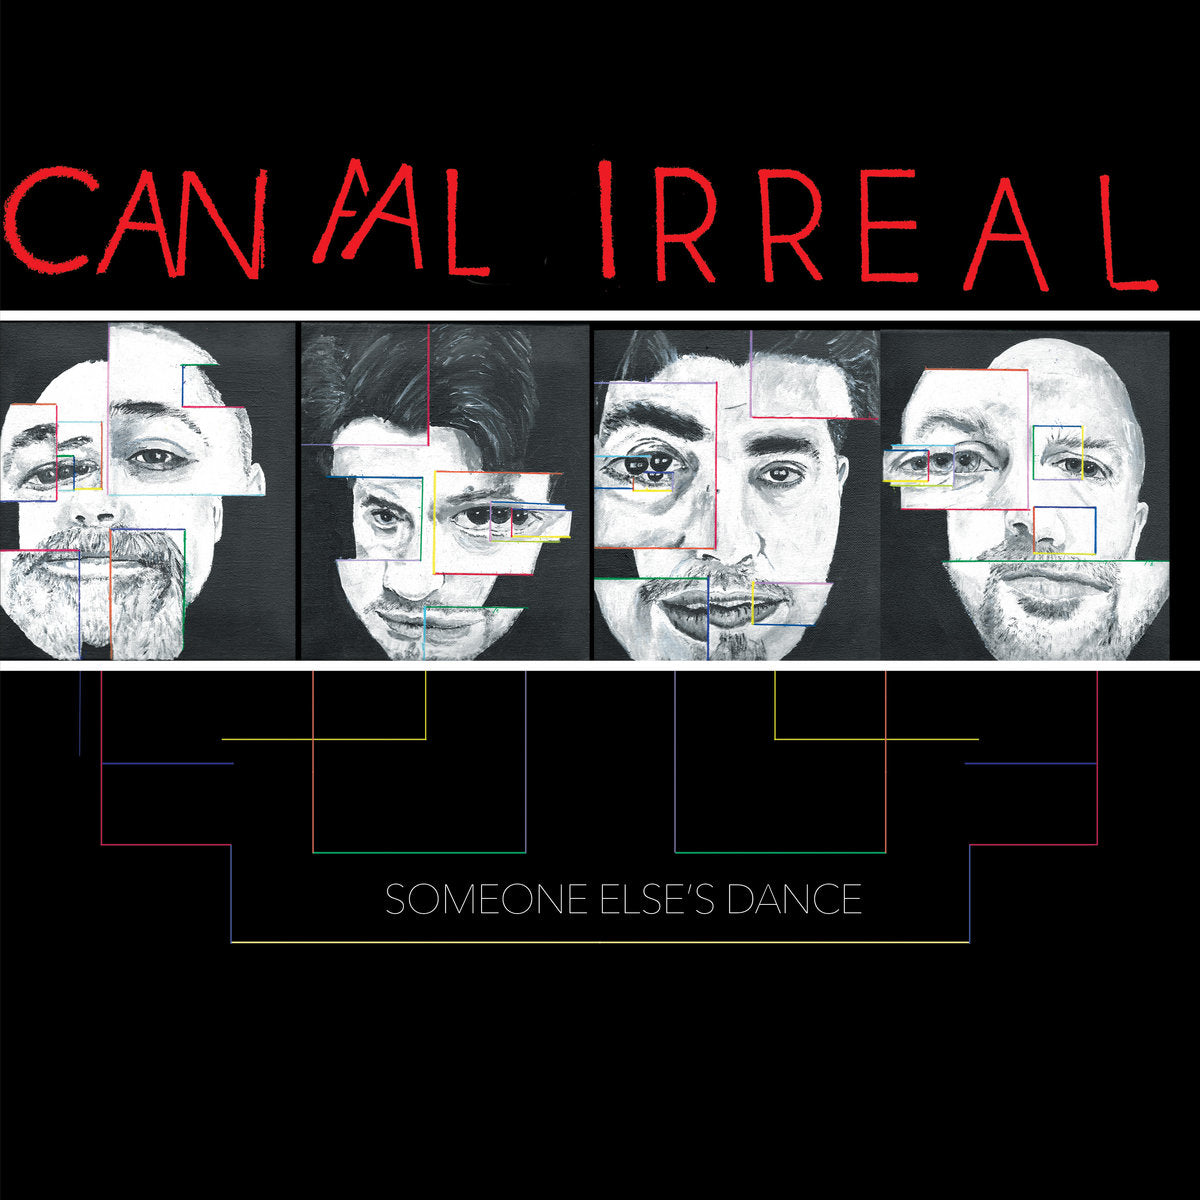 CANAL IRREAL - SOMEONE ELSE'S DANCE Vinyl LP